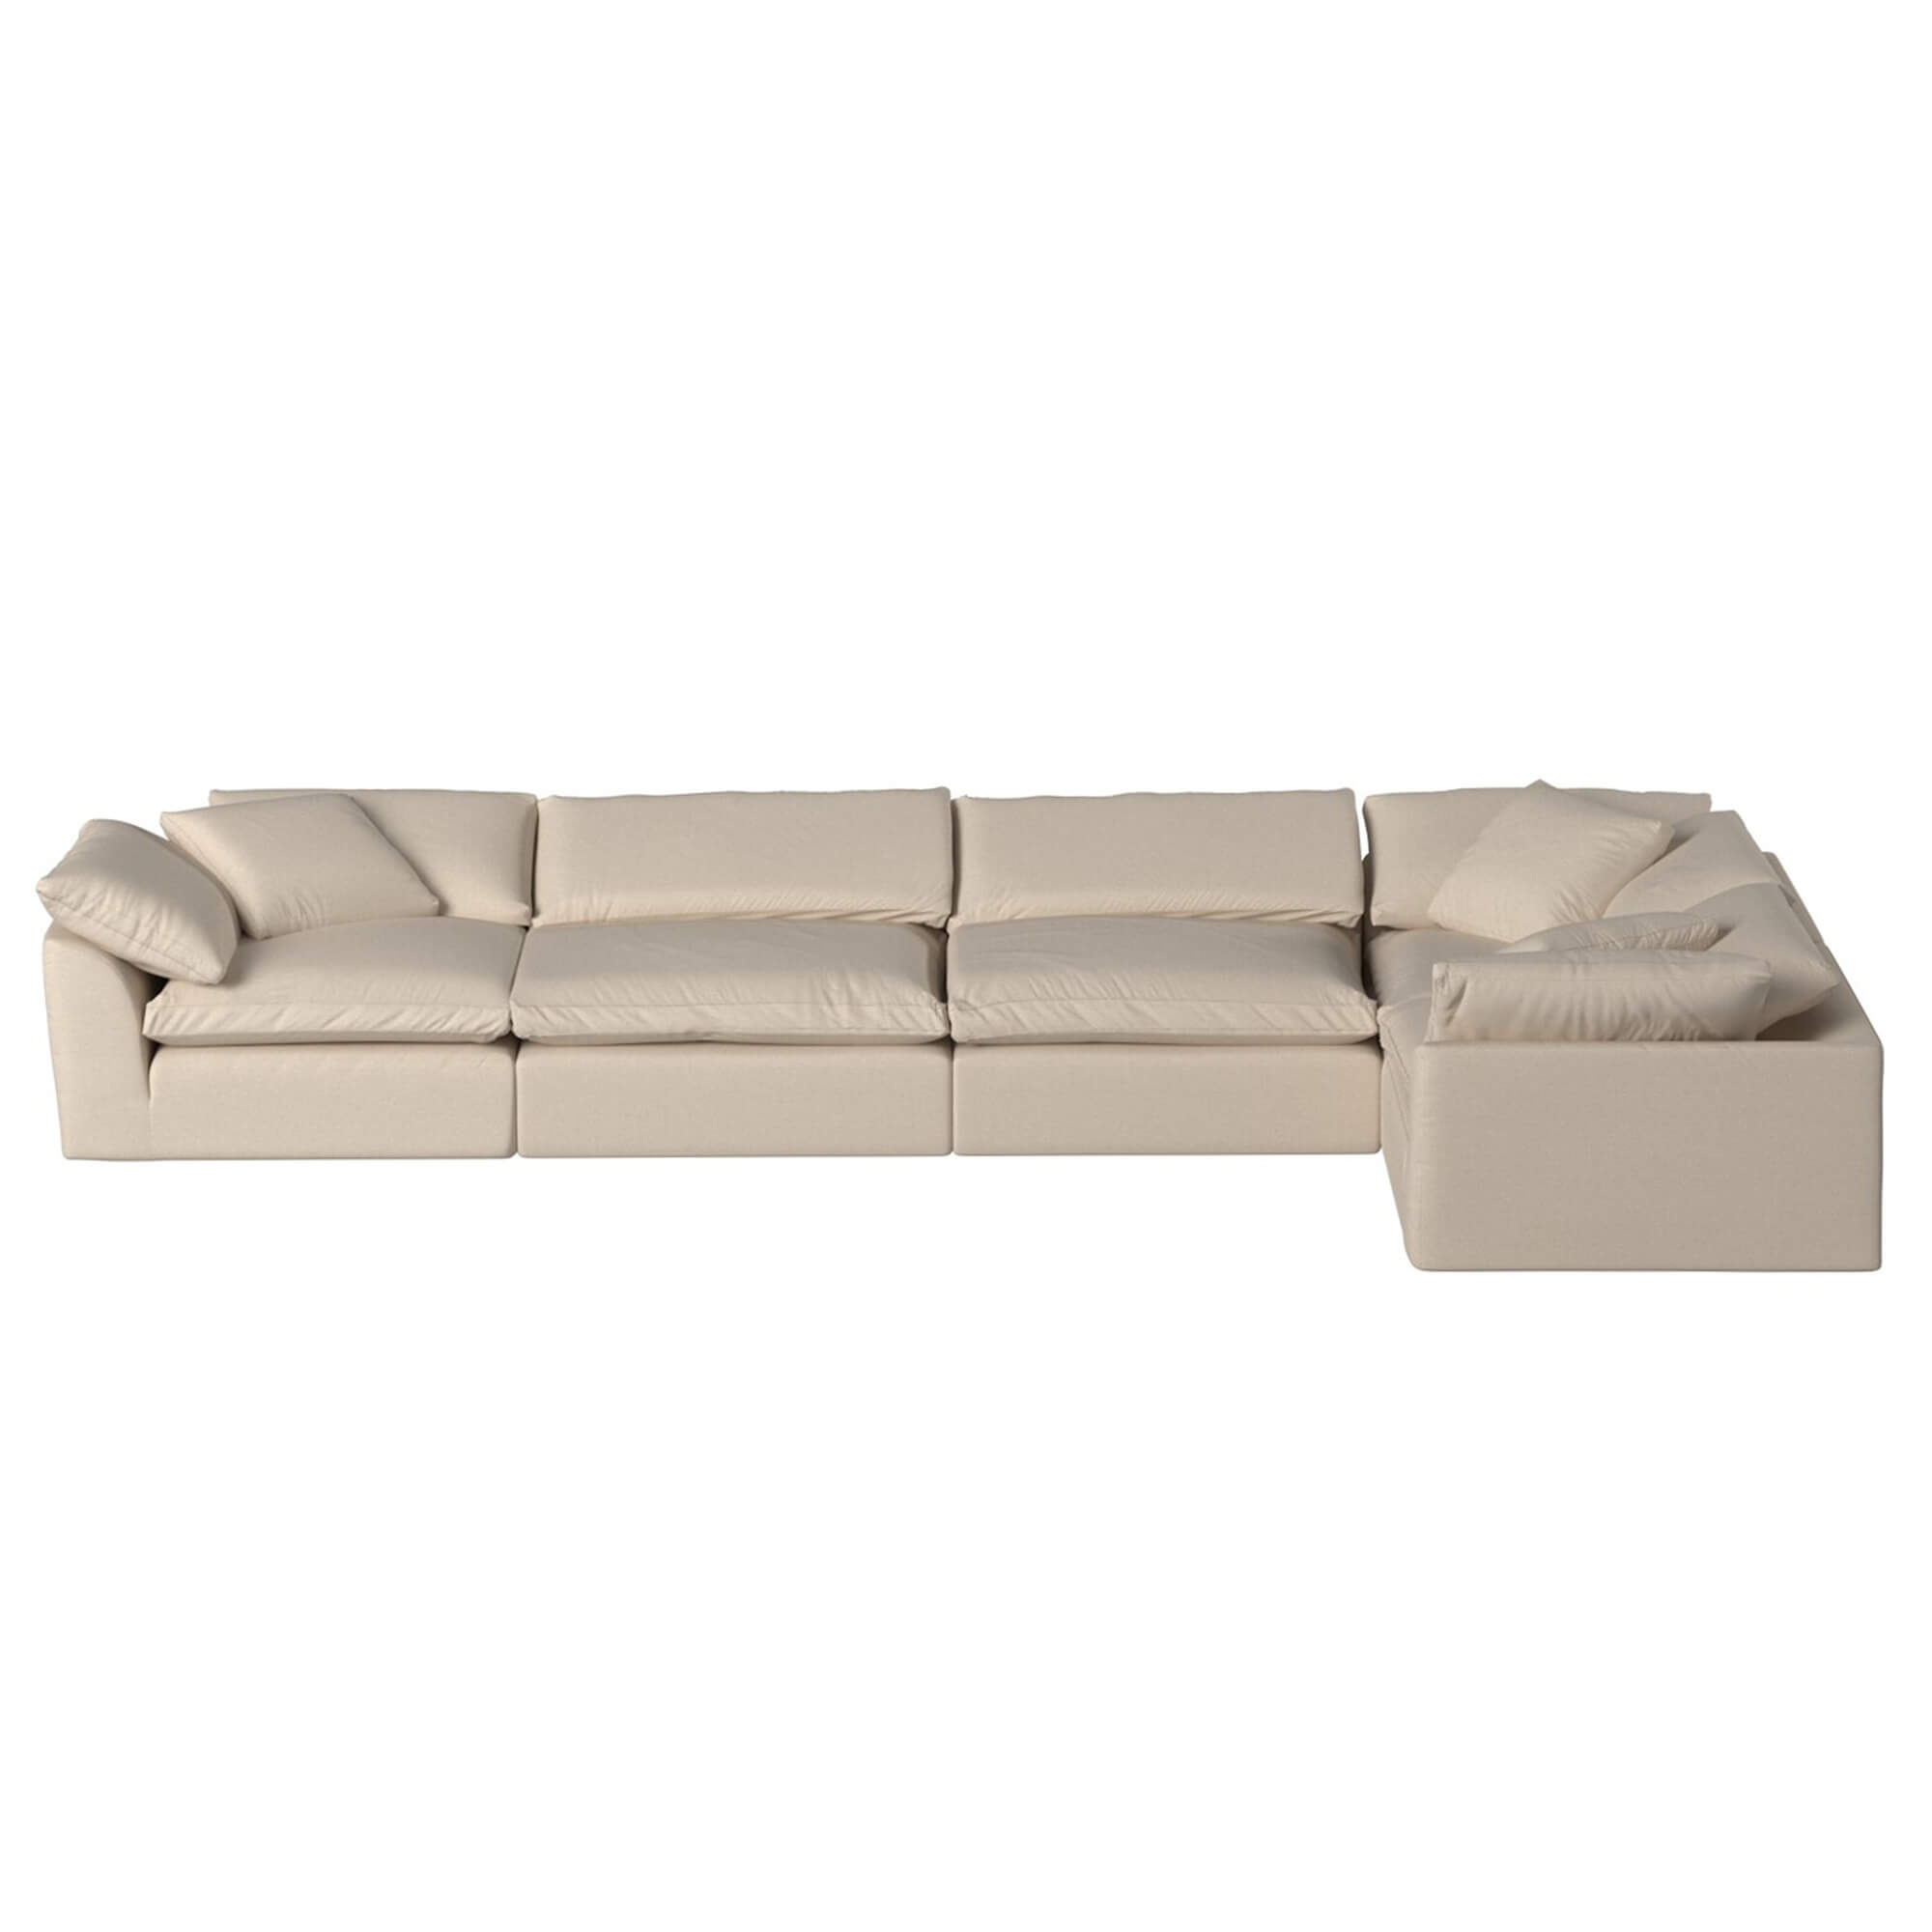 Puff Slipcovered Modular Sectional Sofa, Elite Leather Furniture Reviews